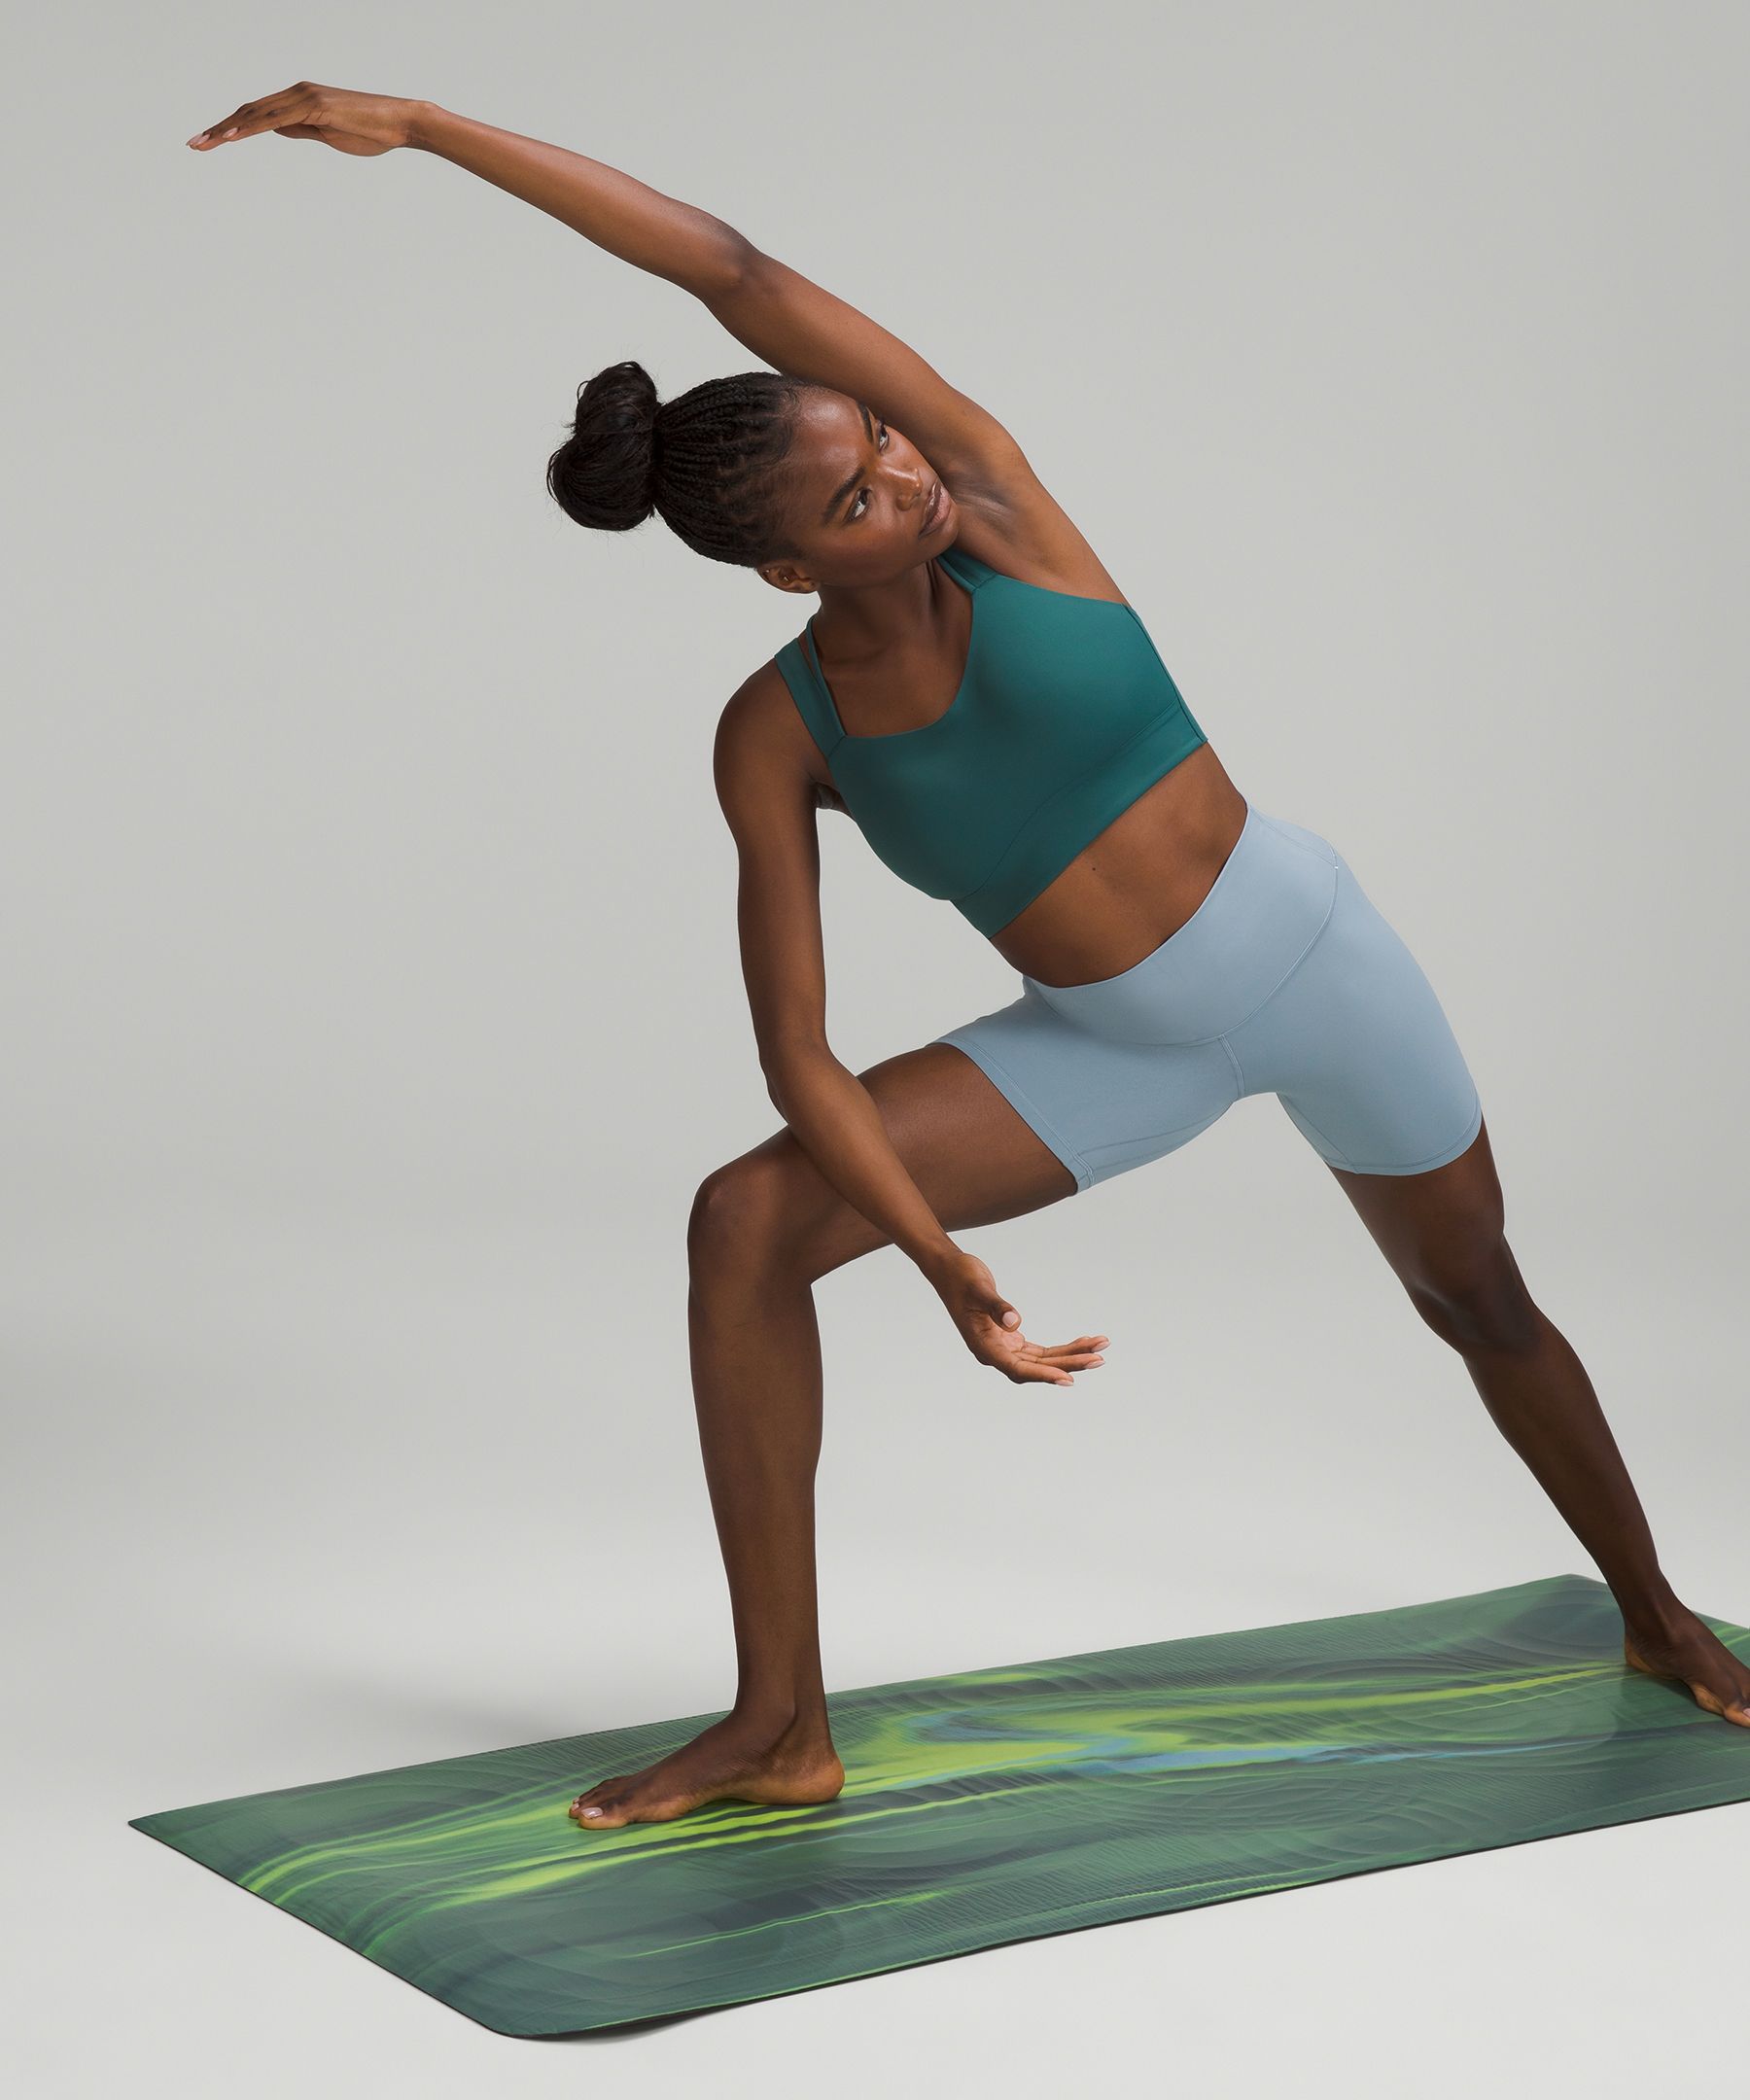 Feel your Practice: lululemon Launches the Take Form Yoga Mat